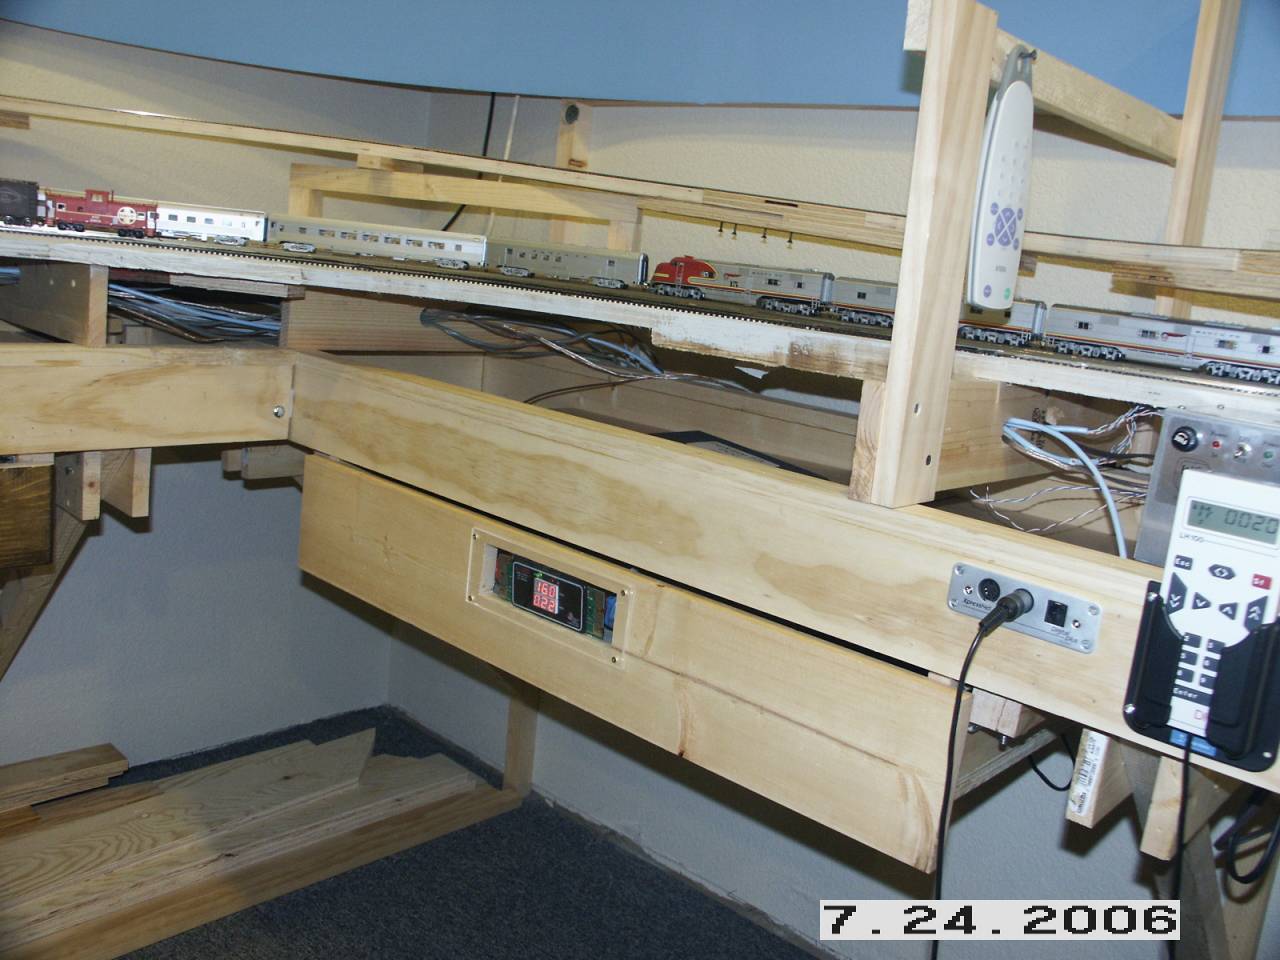 DCC Drawer with RRamp meter installed.